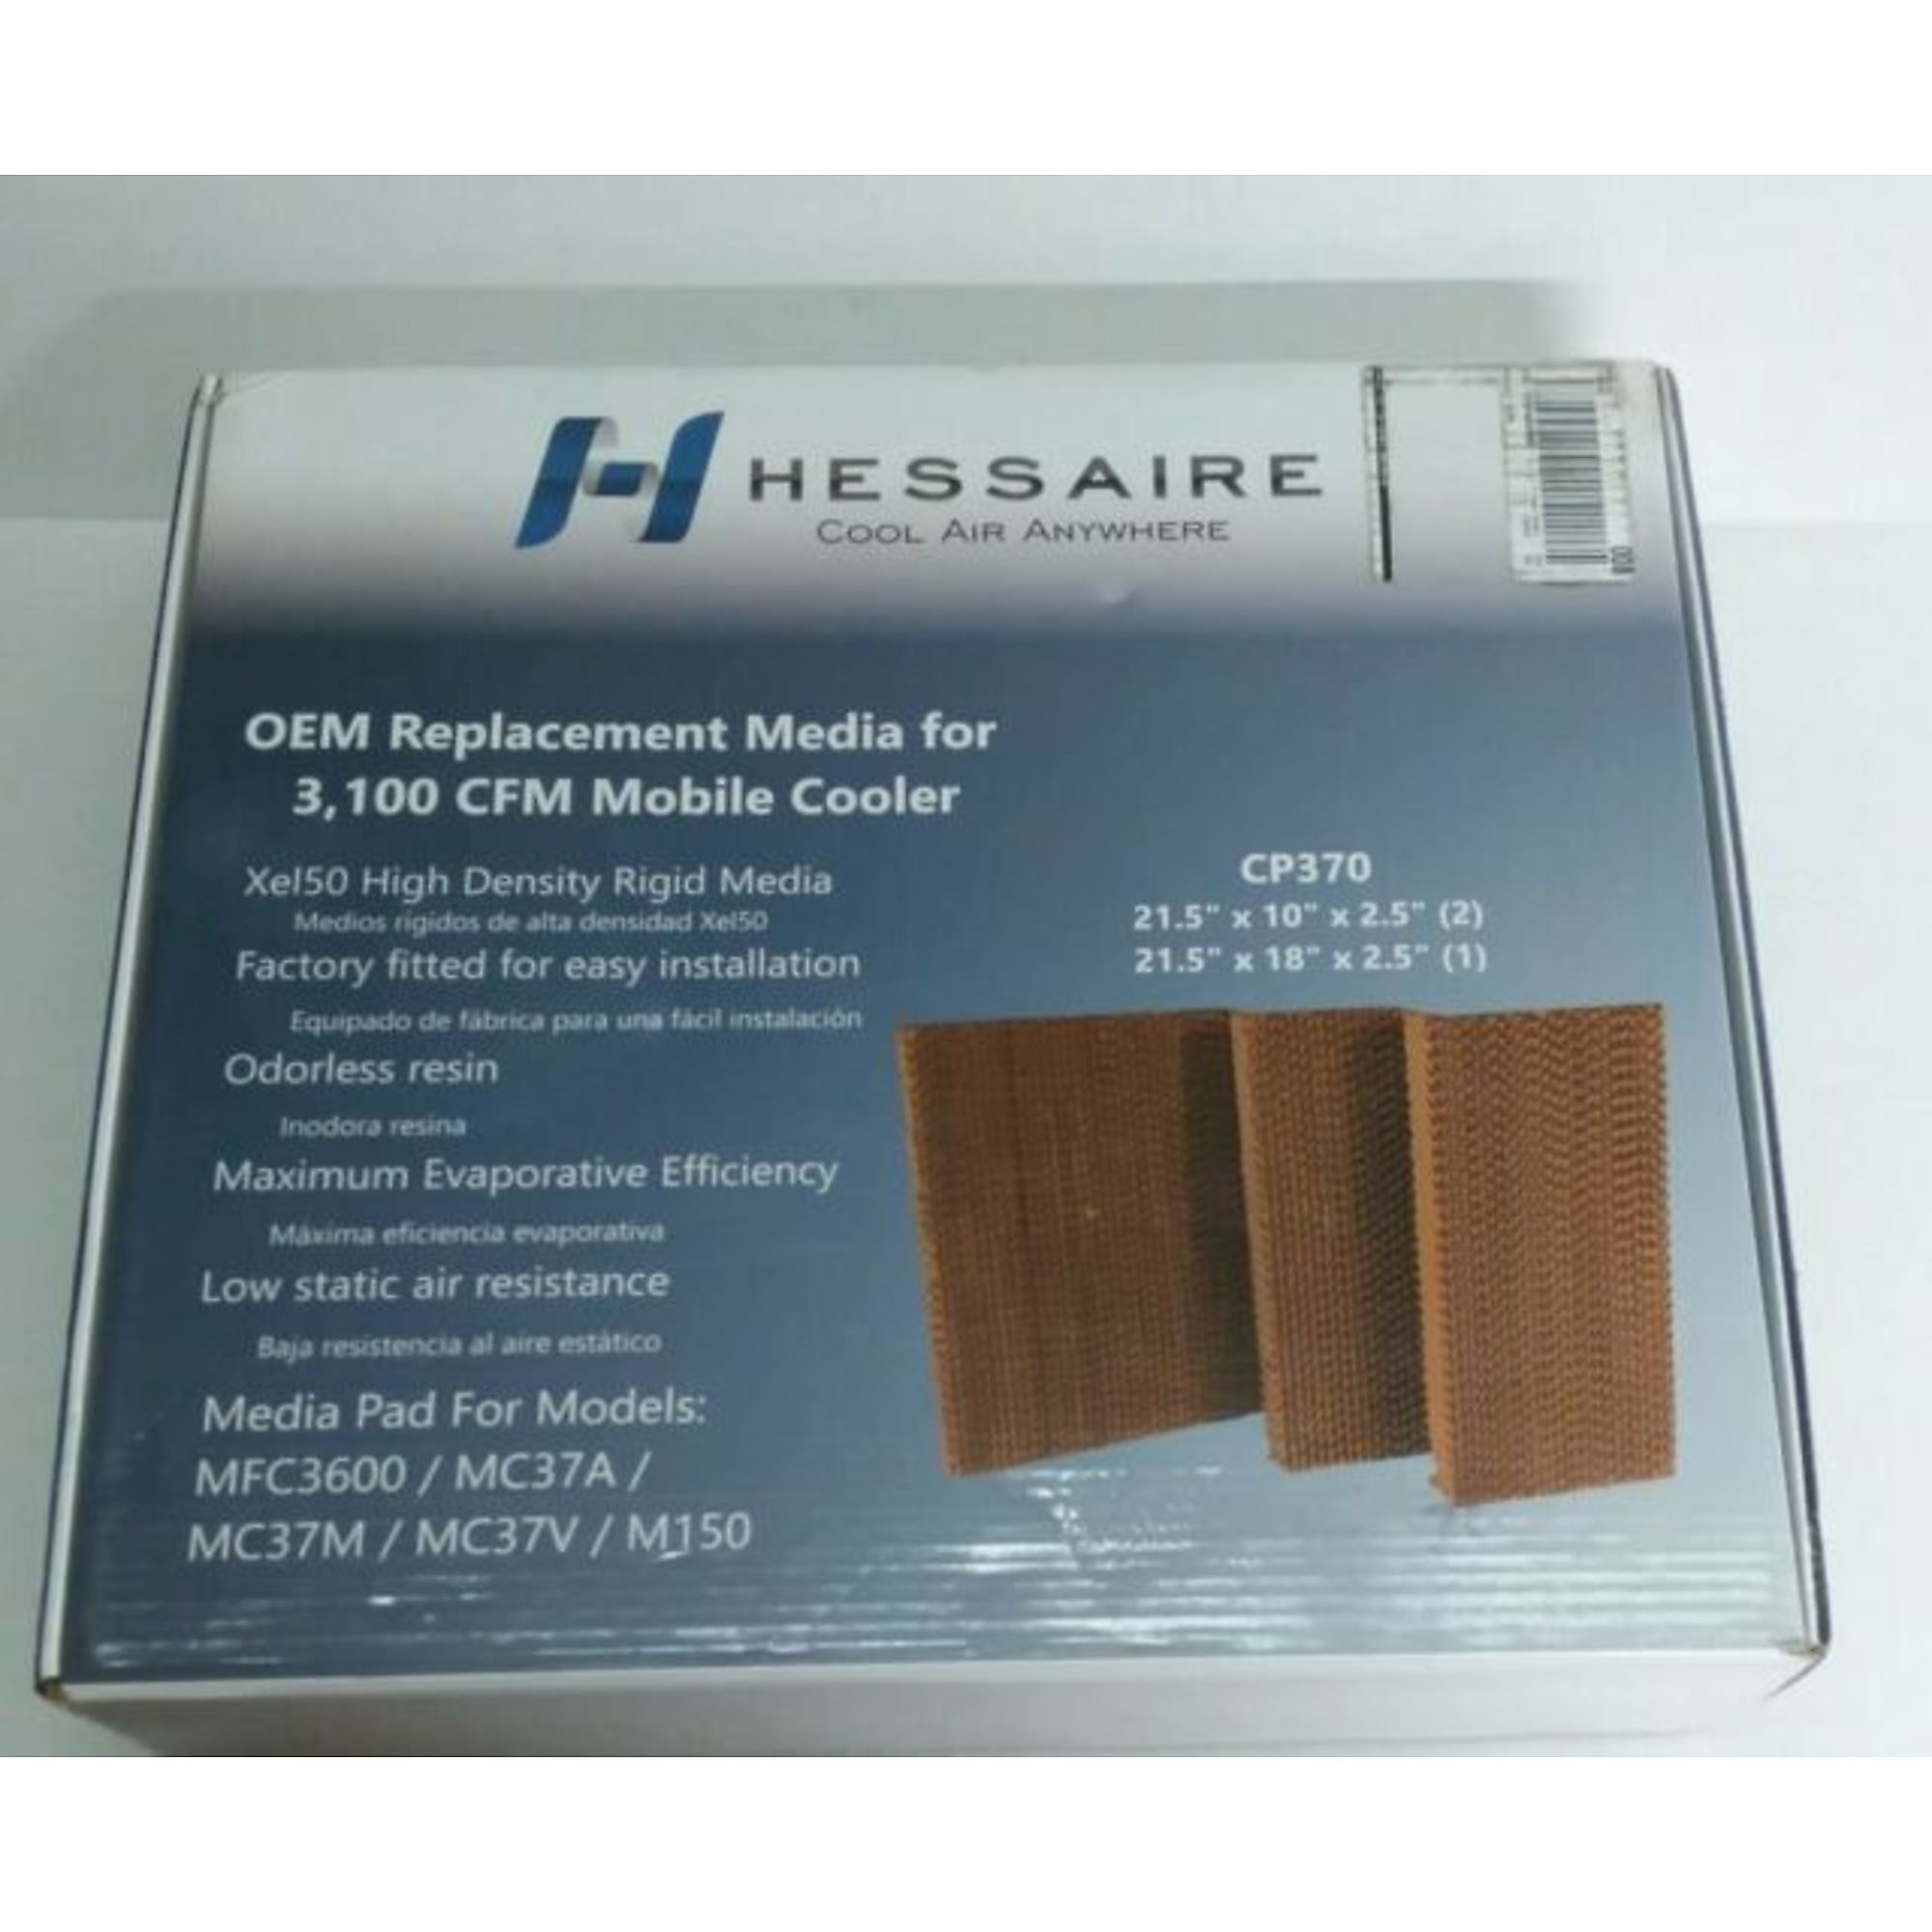 Hessaire, Replacement Media Set, Model CP370